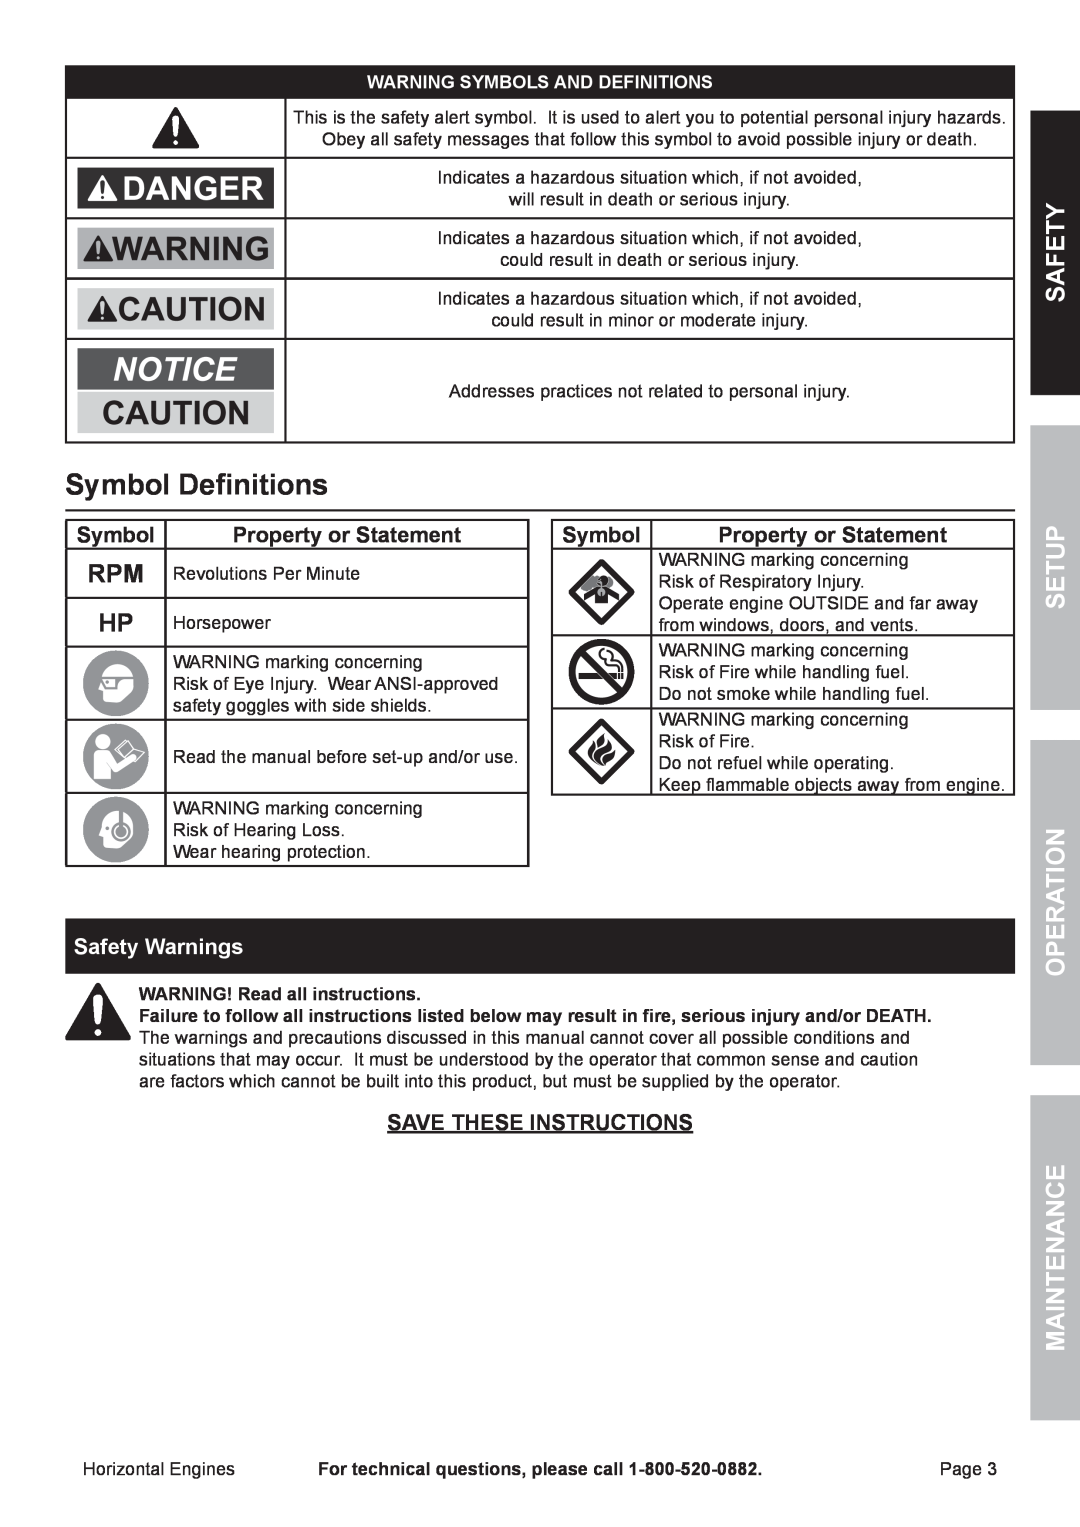 Harbor Freight Tools 68306, 68120 Symbol Definitions, Setup Operation, Maintenance, Property or Statement, Safety Warnings 